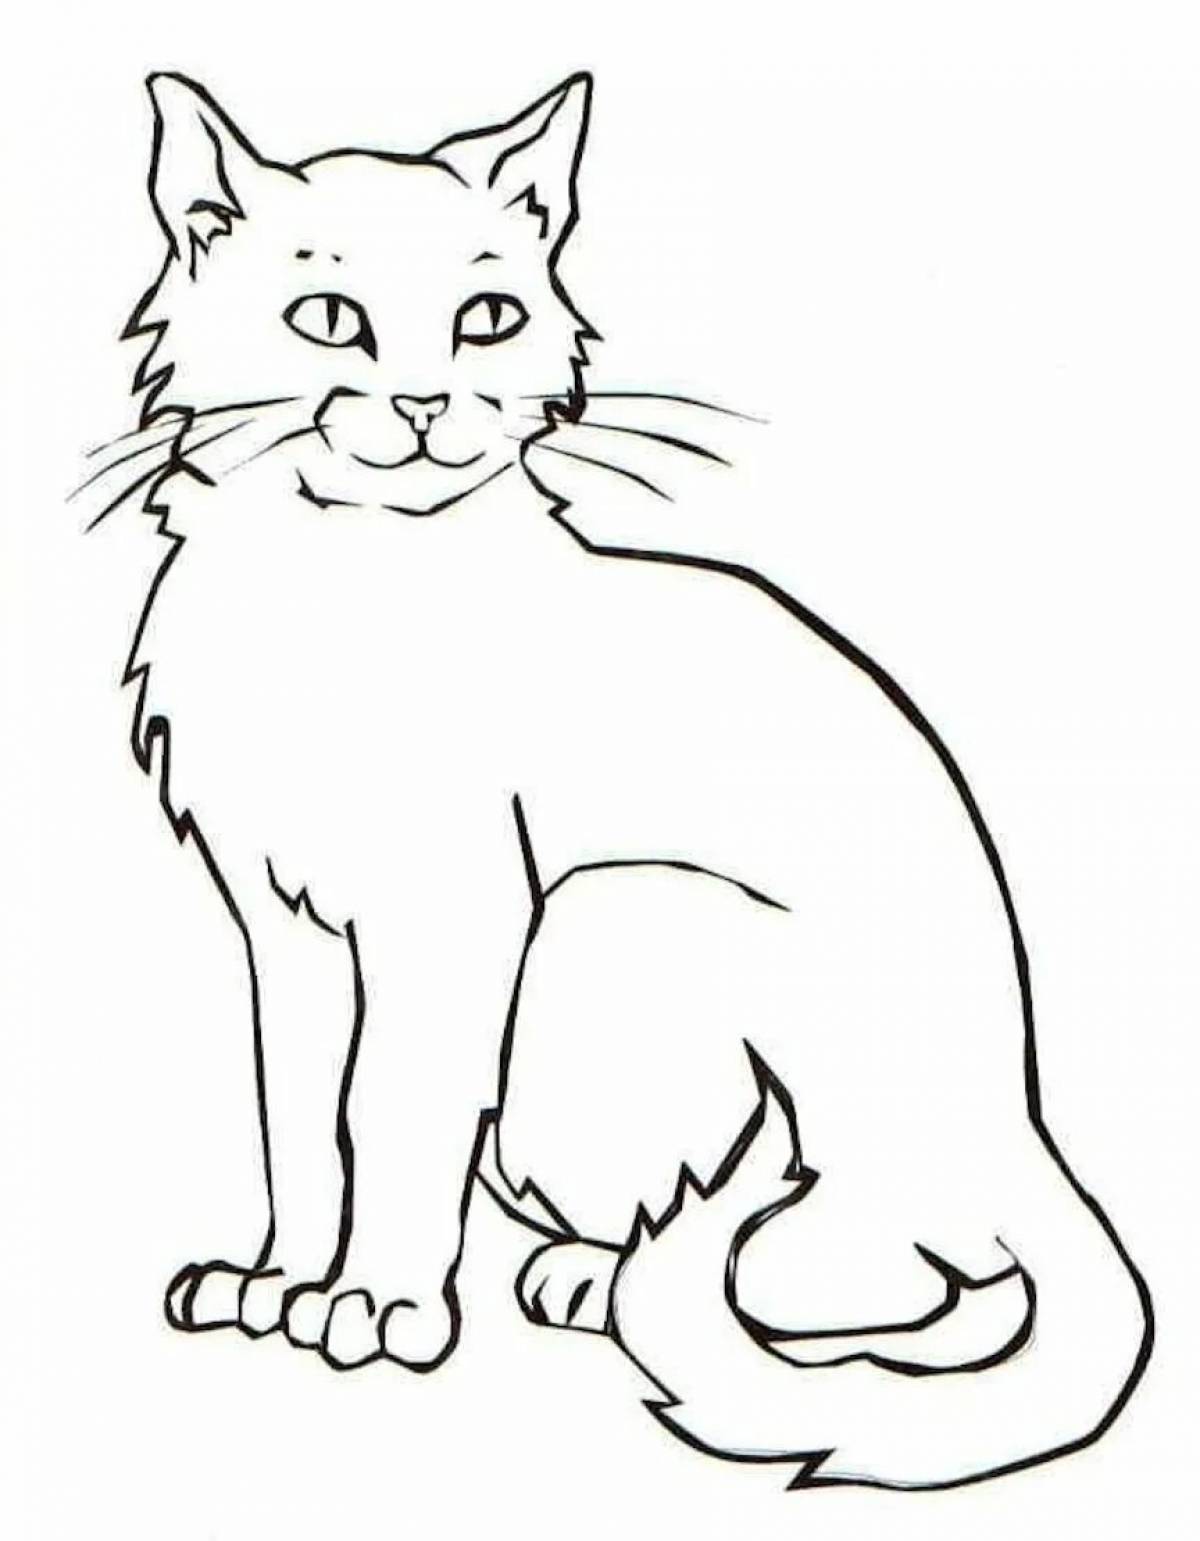 Adorable white cat coloring book